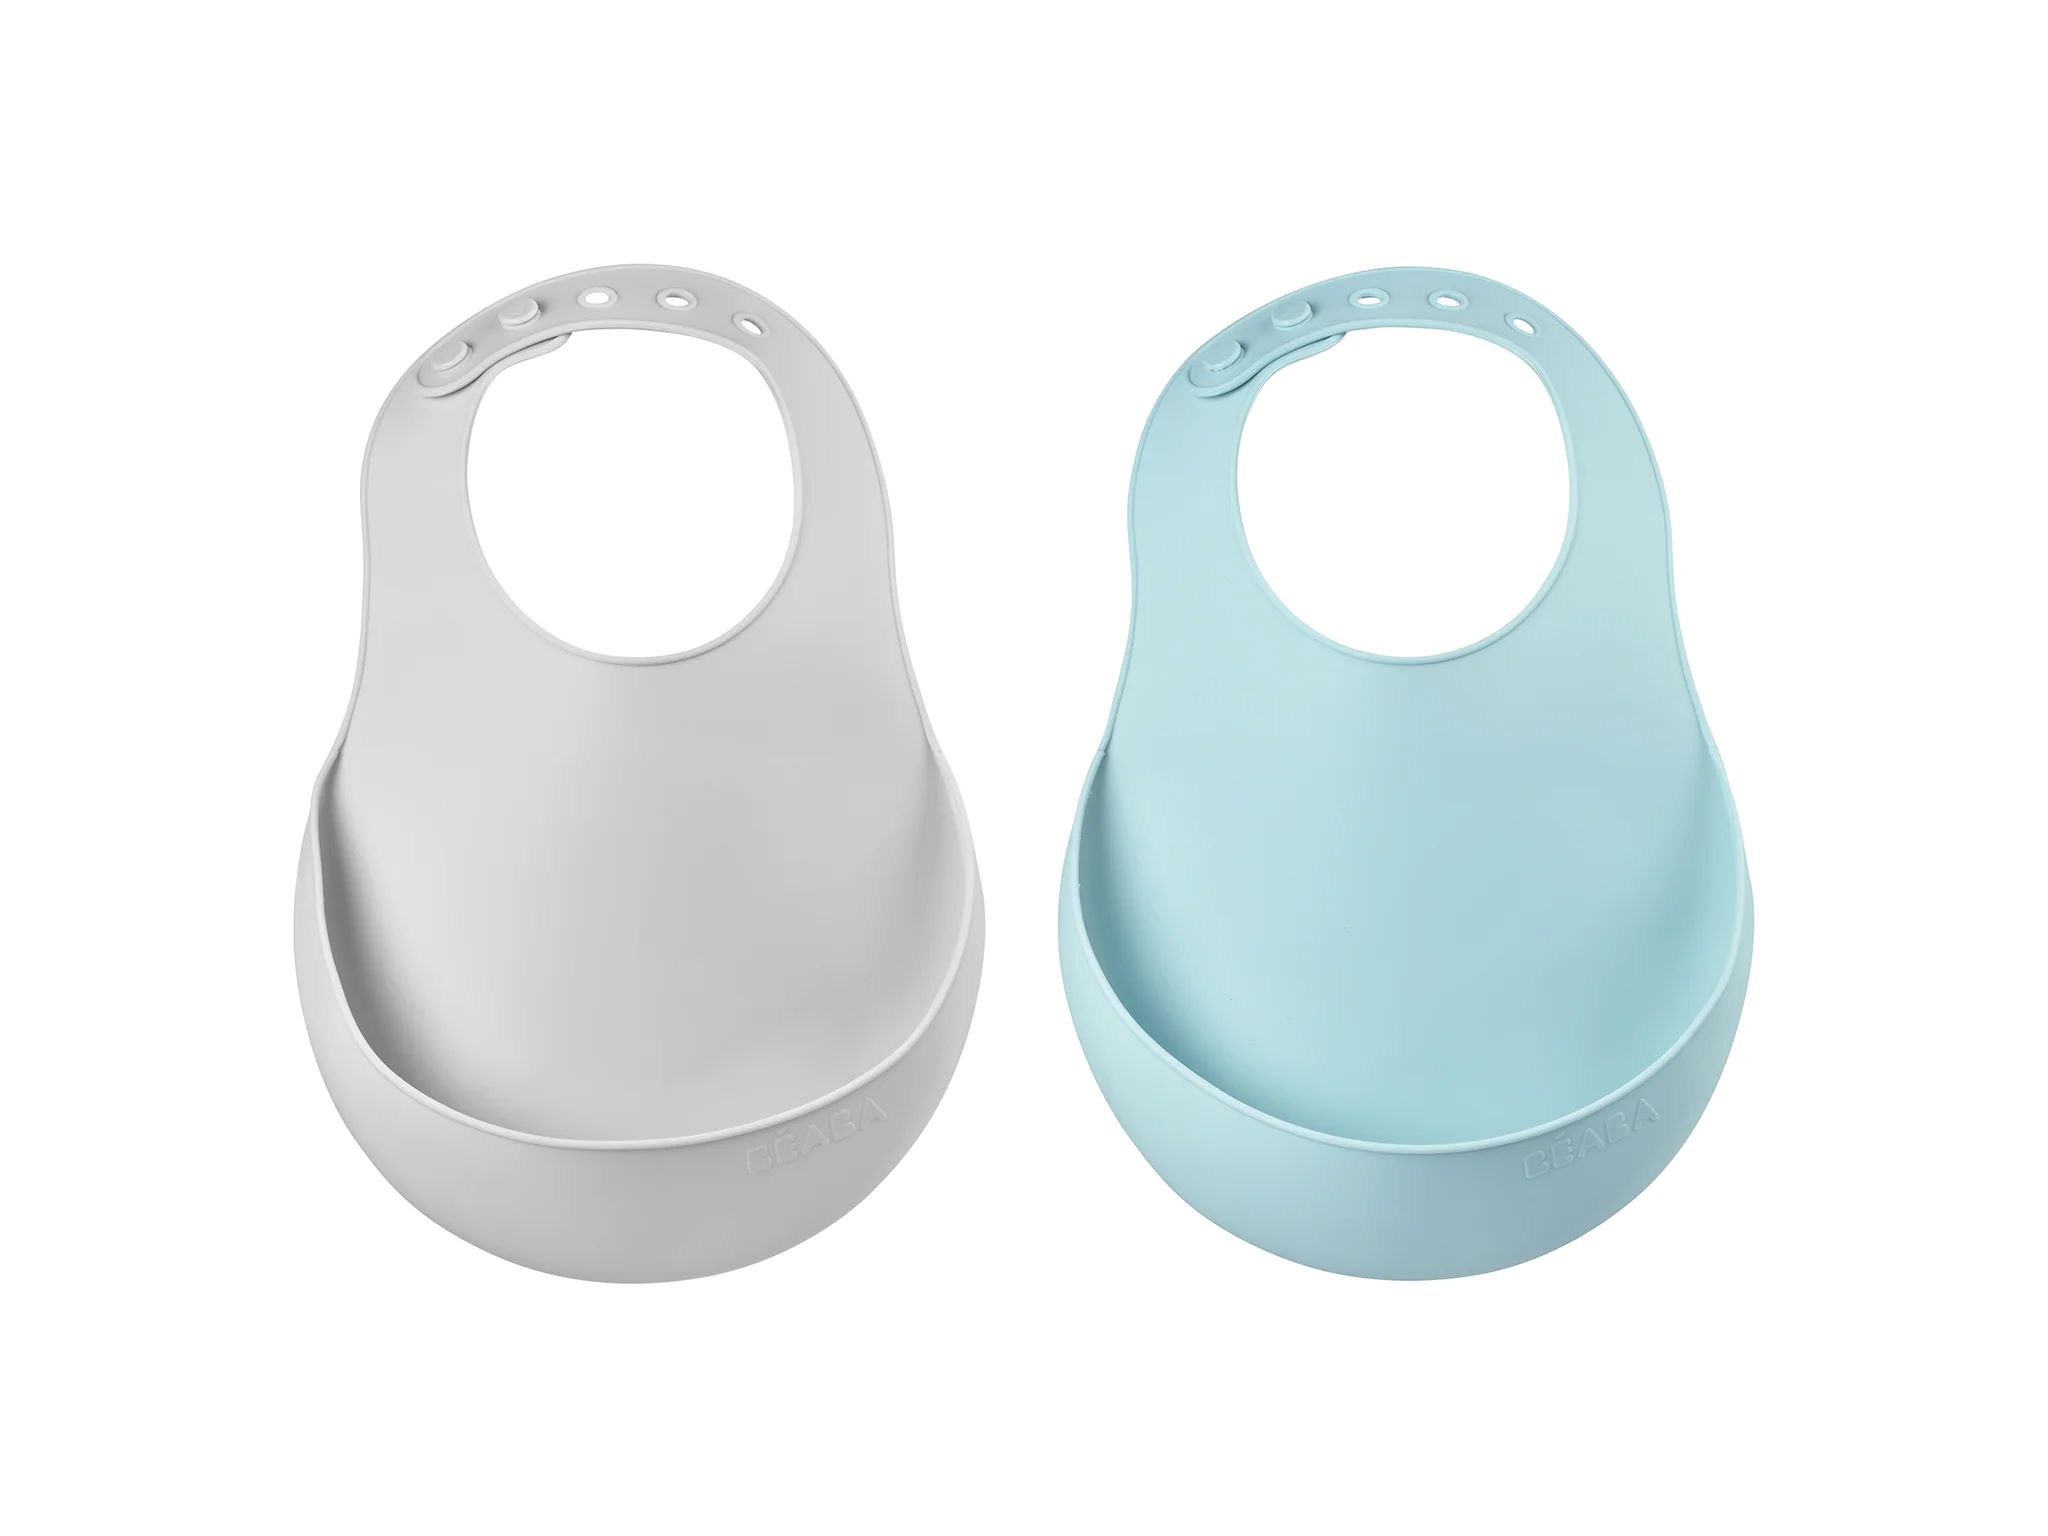 Bibs Review: The Perfect Baby Essential for Mess-Free Mealtimes